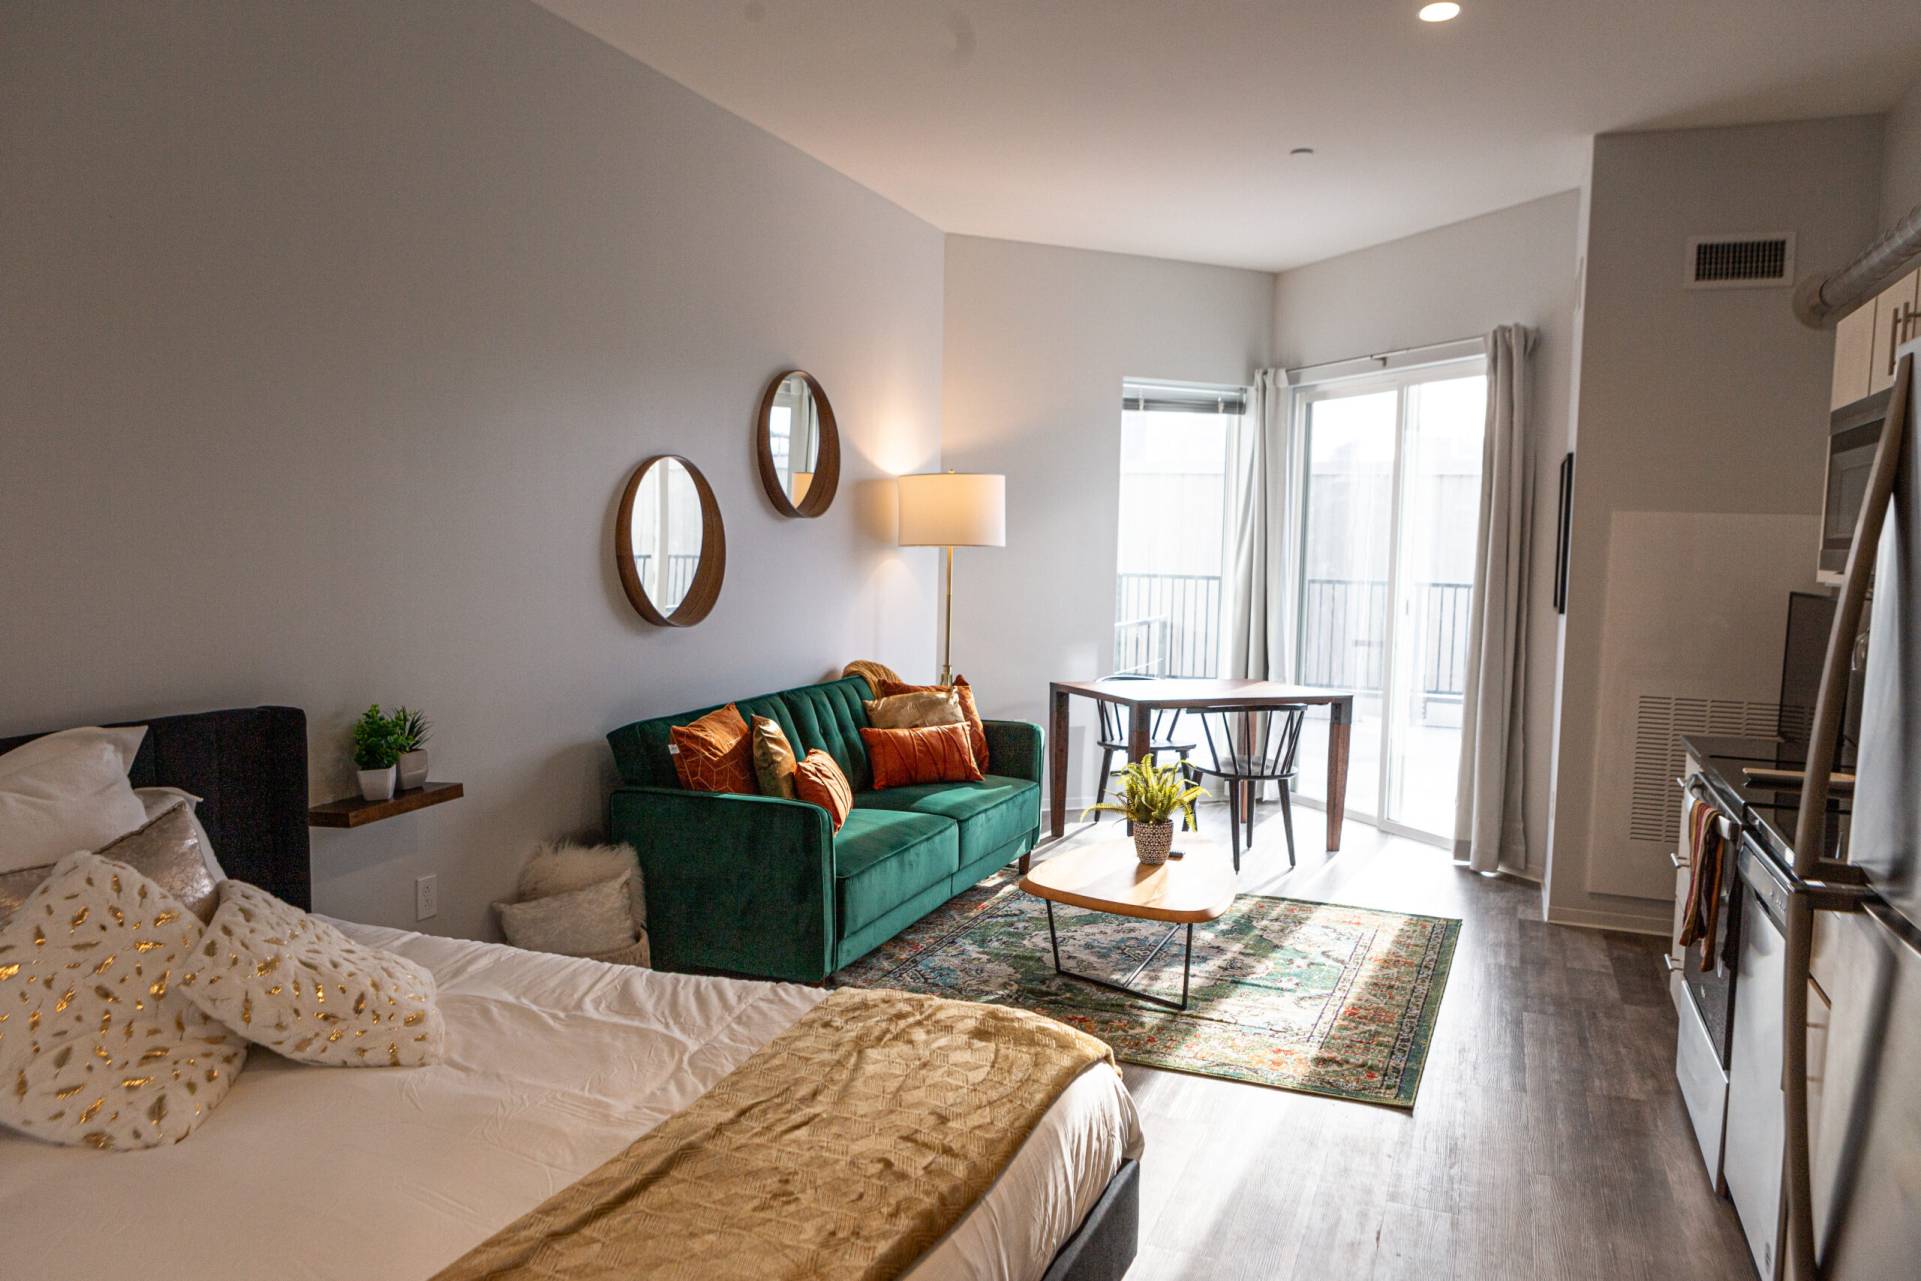 Studio apartment utilized as furnished guest suite. The bed is at the front of the image, looking towards a couch and sliding patio door. On the right is the kitchen area.